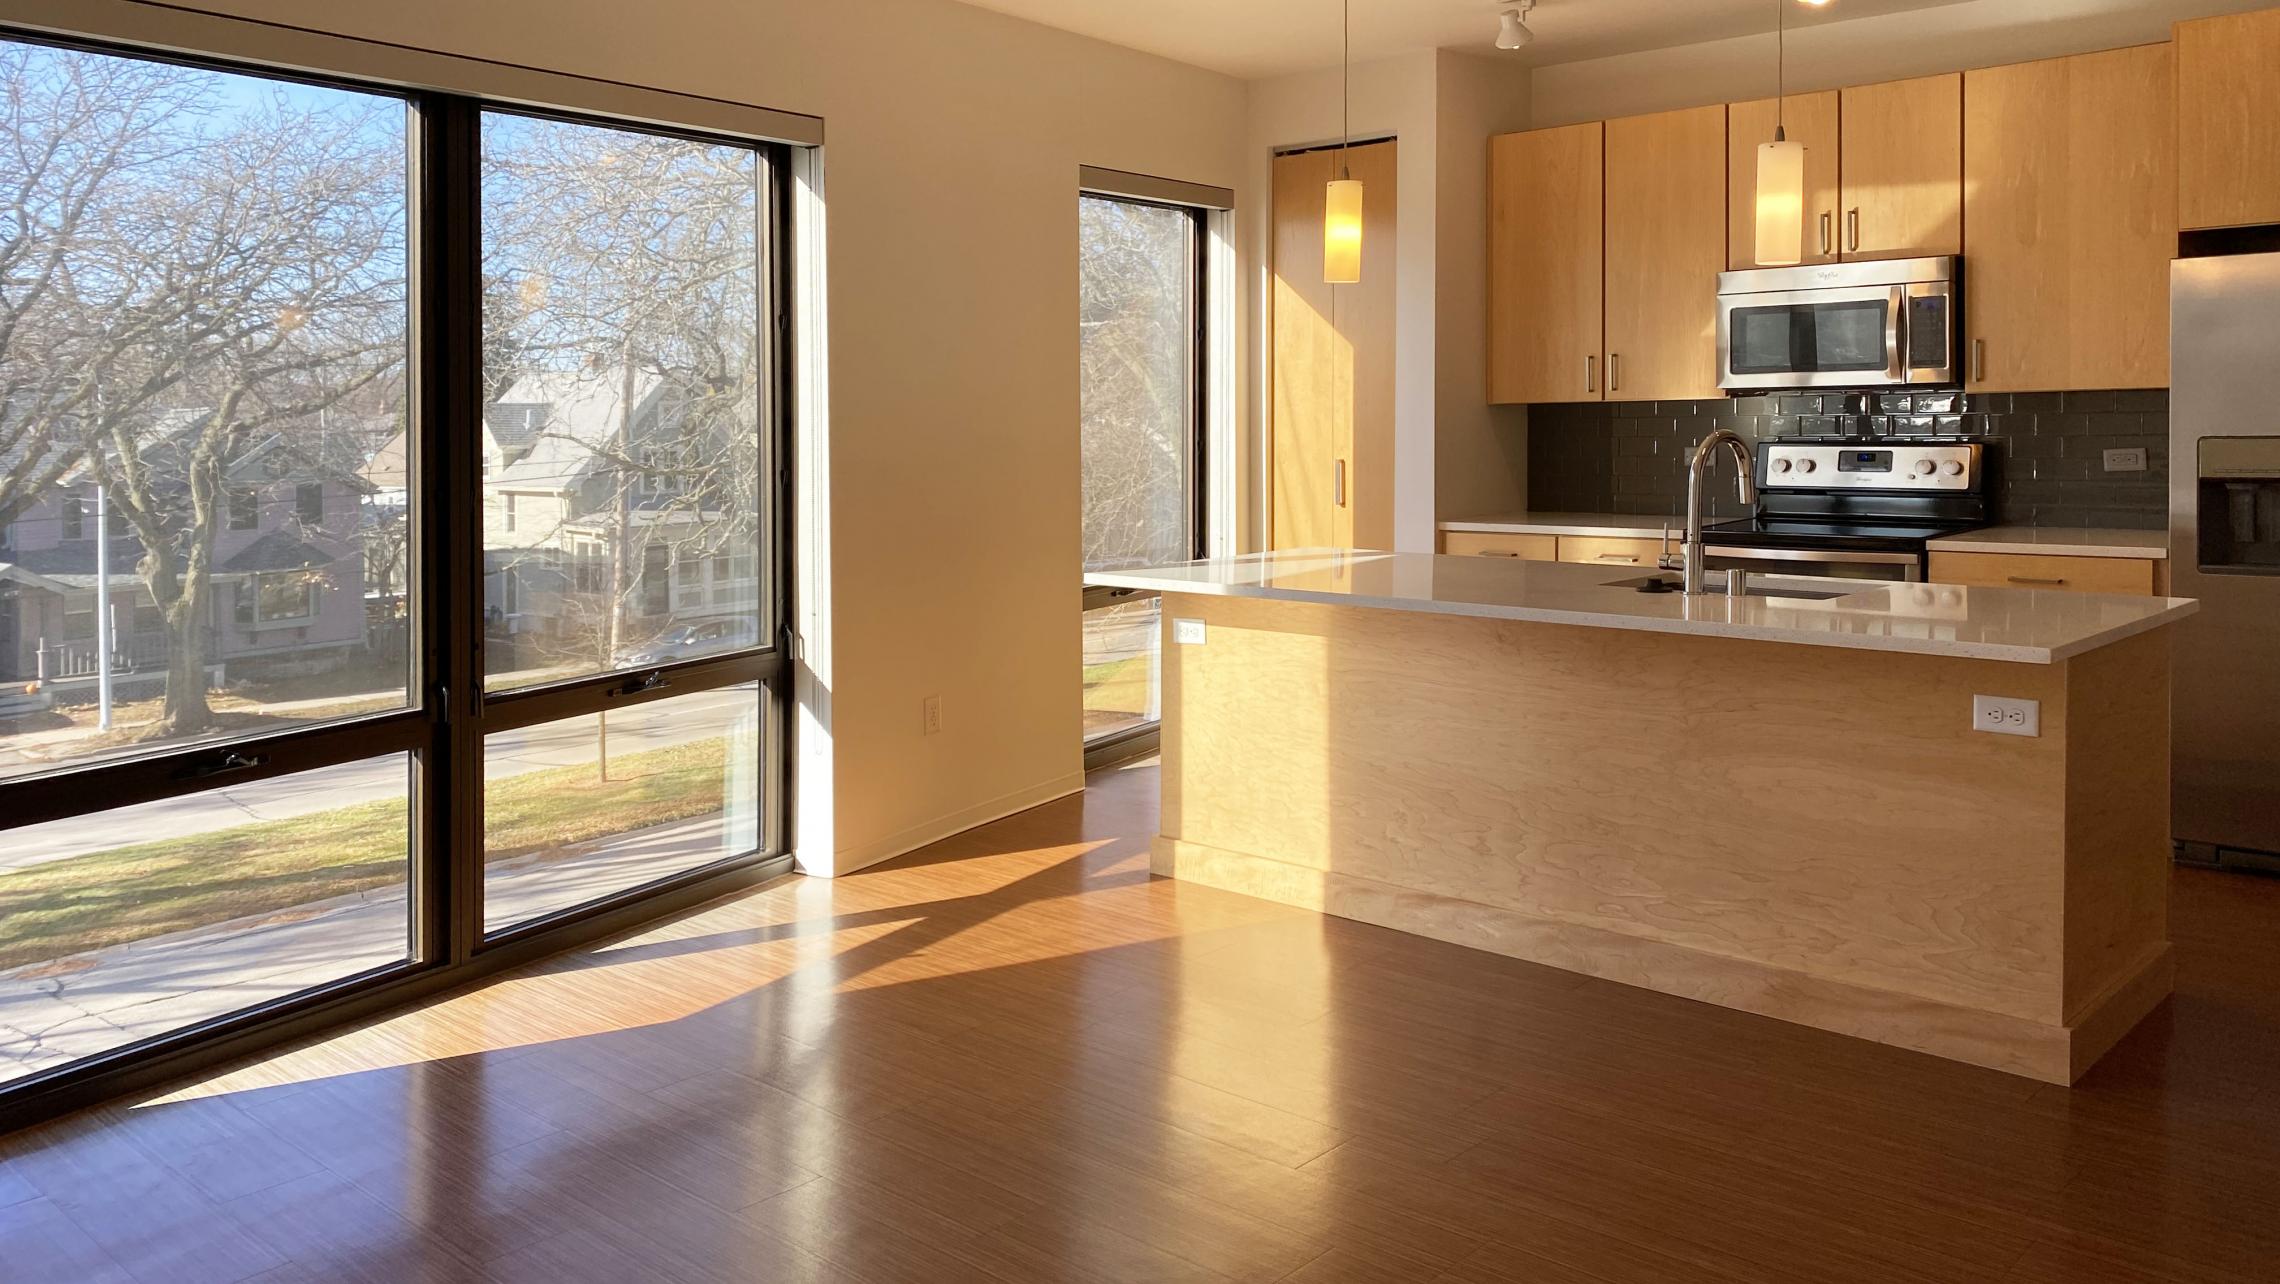 SEVEN27-at-The-Yards-Apartment-204-One-Bedroom-Modern-Upscale-Luxury-Design-Radiant-Heating-Fitness-Lounge-Fireplace-Courtyard-Downtown-Madison-Cats-Dogs-Lifestyle-Natural-Light-Lake-View